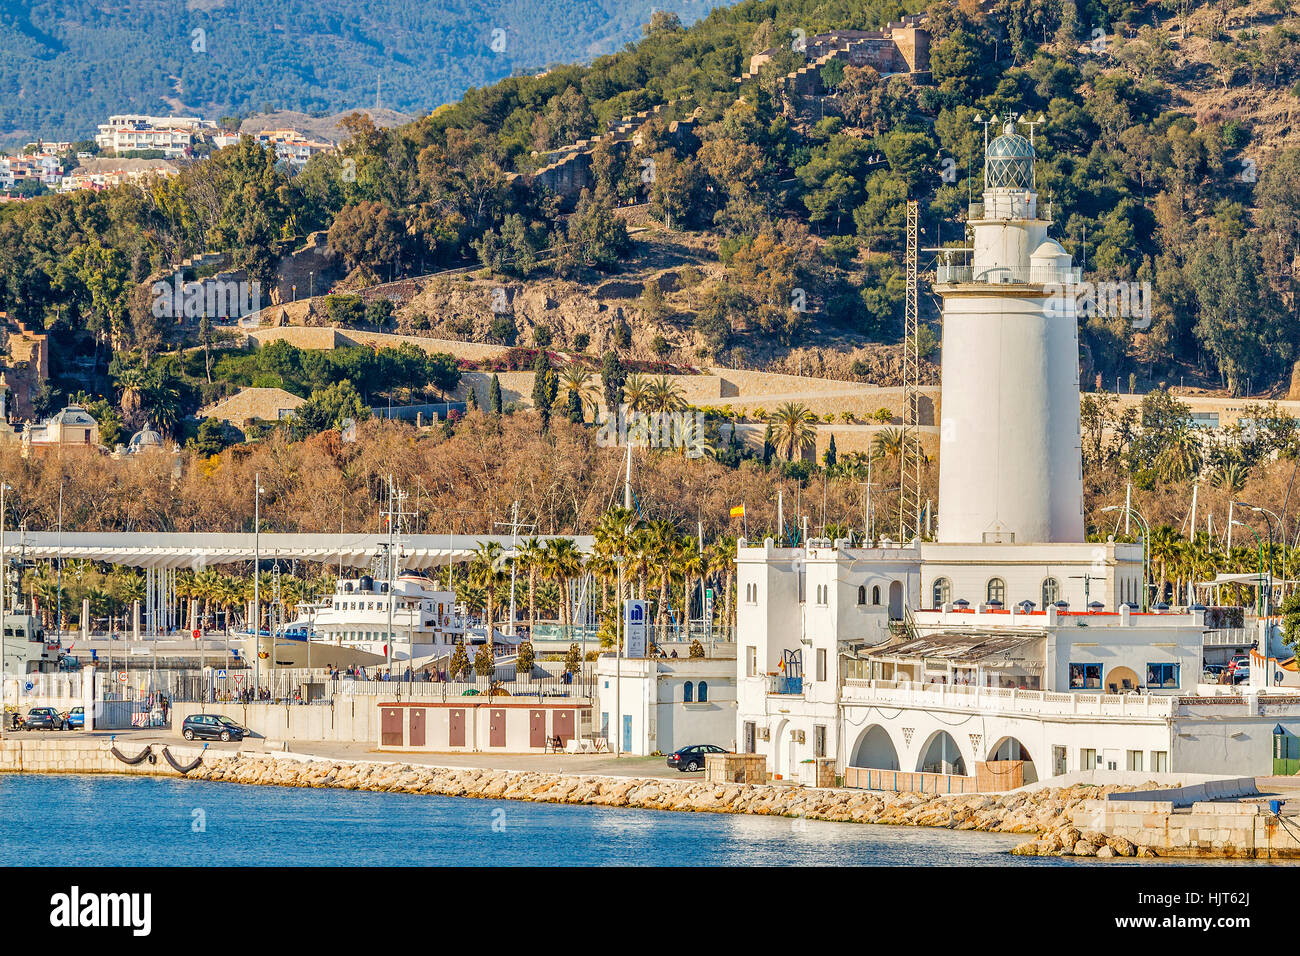 The Lighthouse At Malaga Andalusia Spain Stock Photo